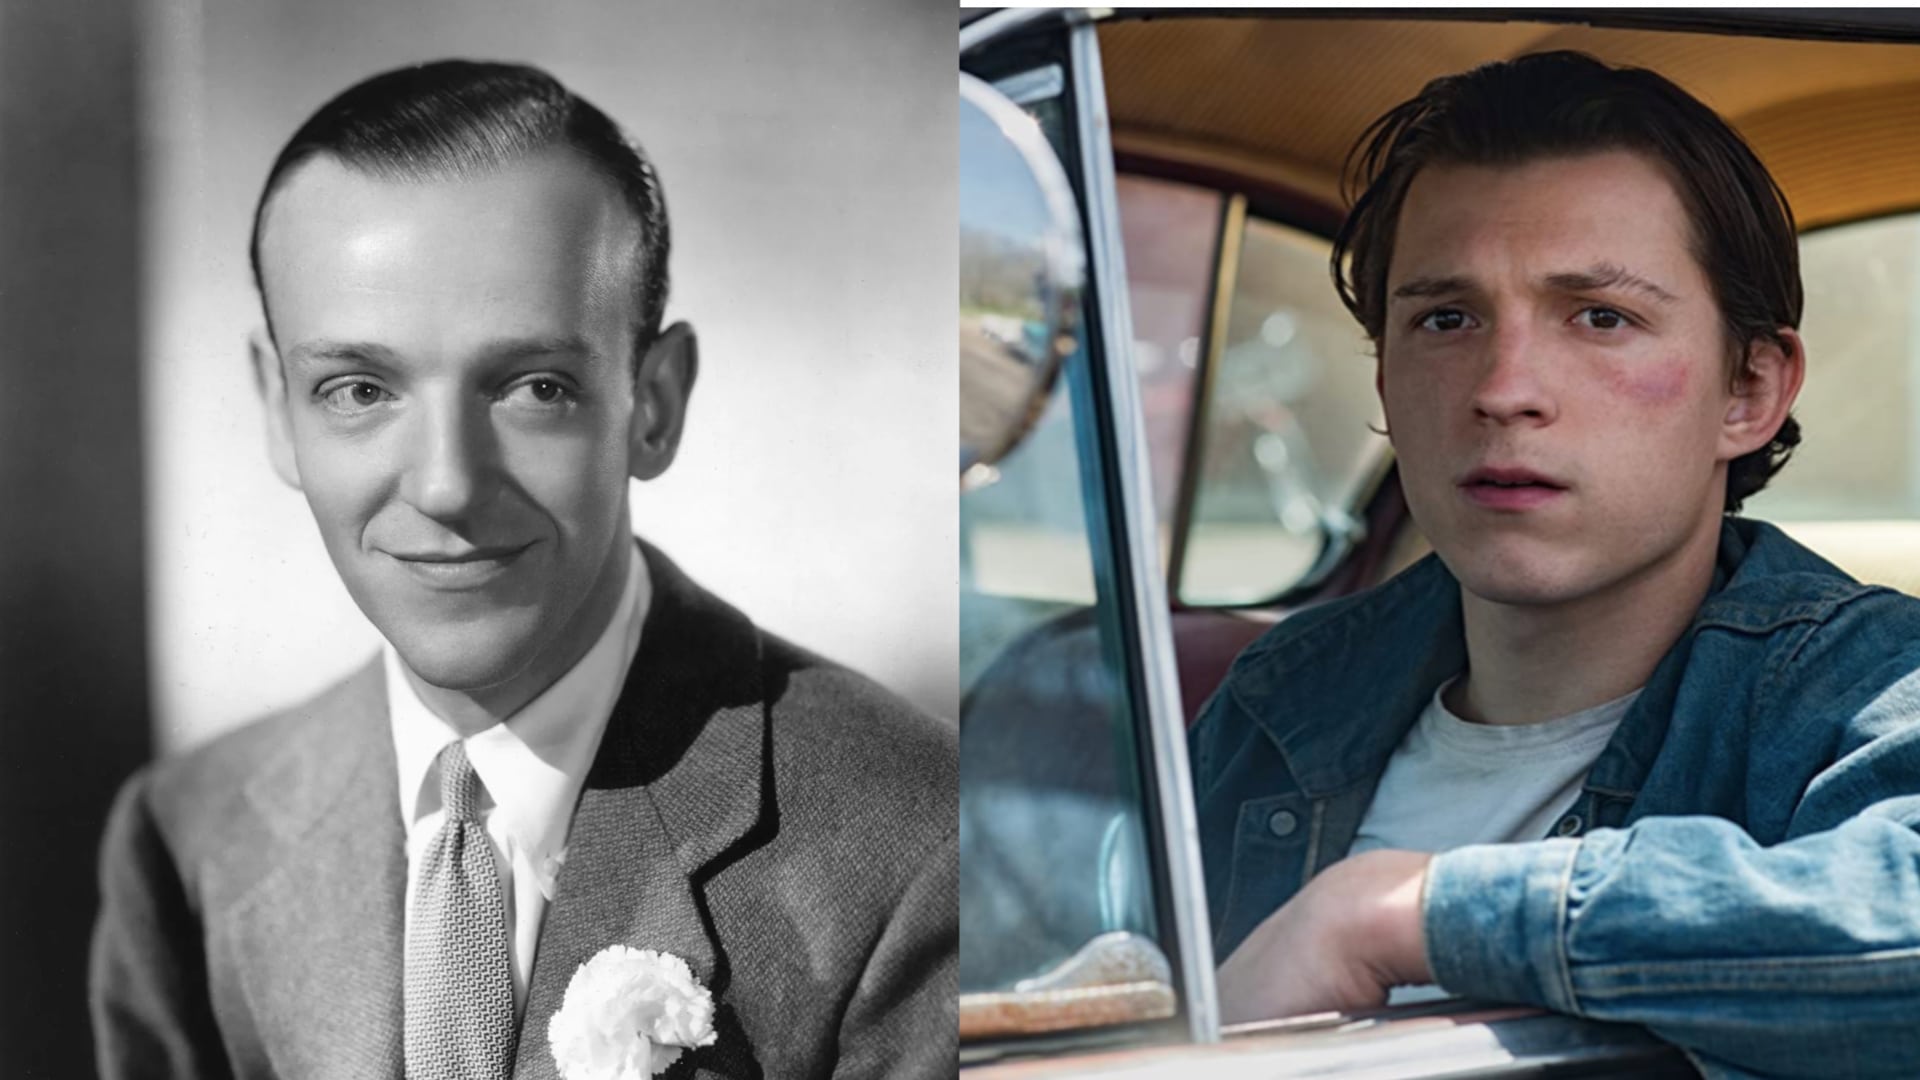 tom holland fred astaire